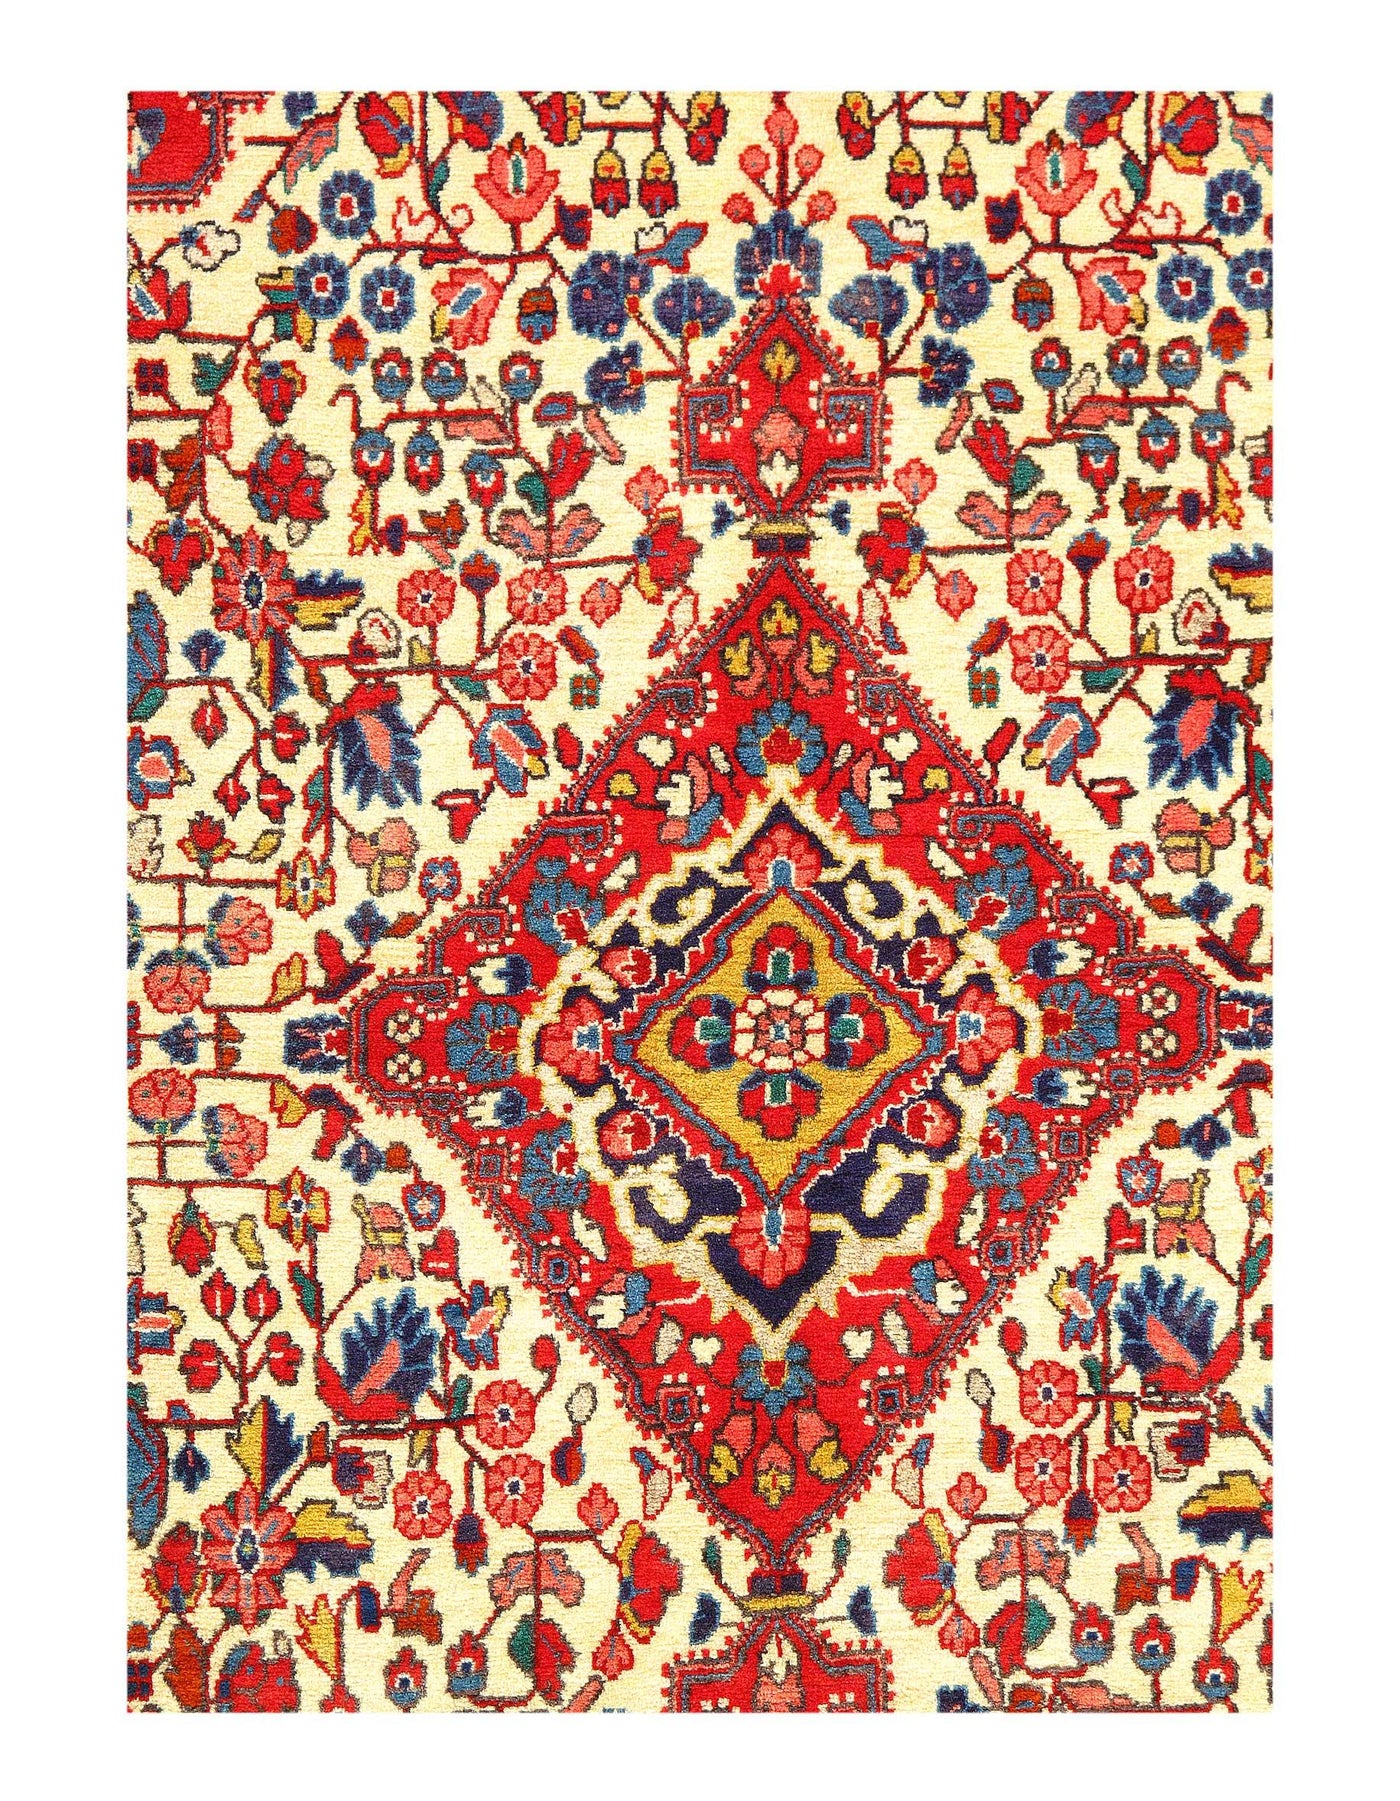 Canvello Persian Sarouk Red Vintage Rug - 3'6'' x 5''2''